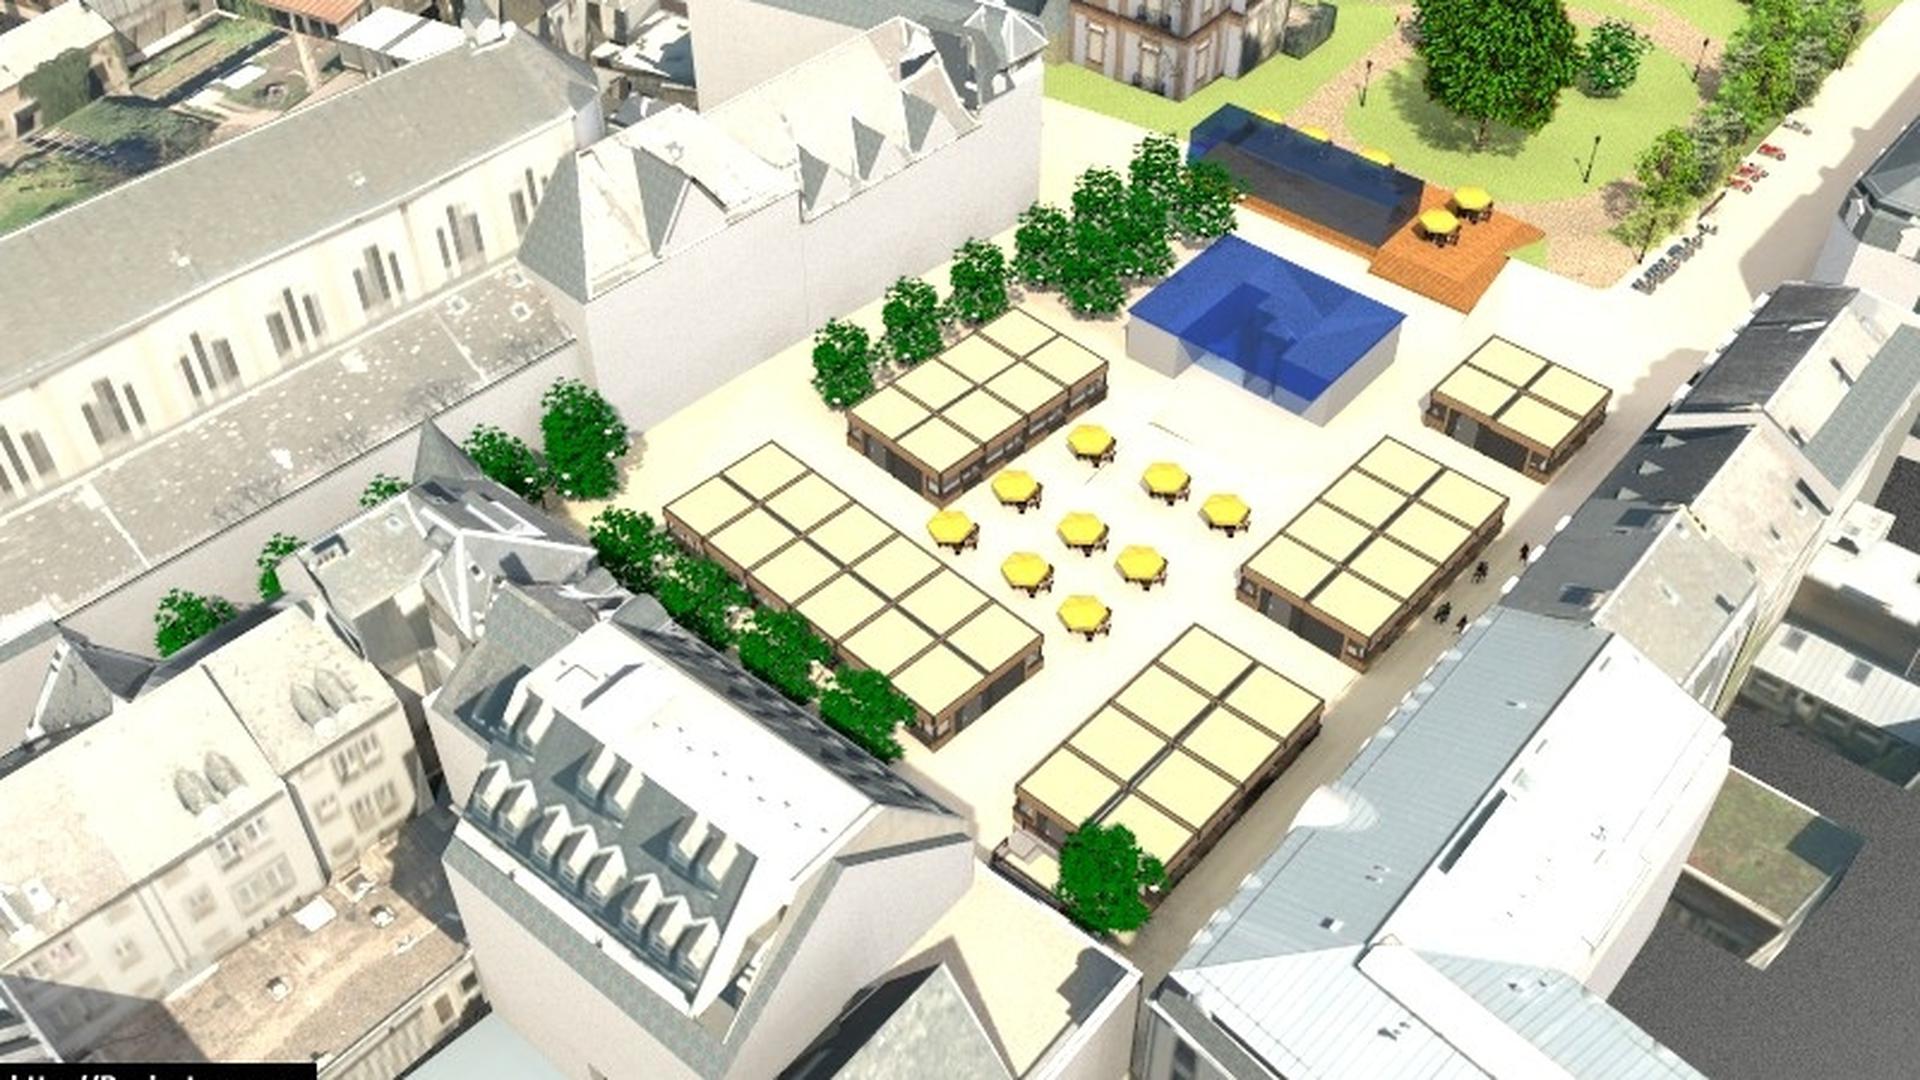 A 3D model of the future plans for the square